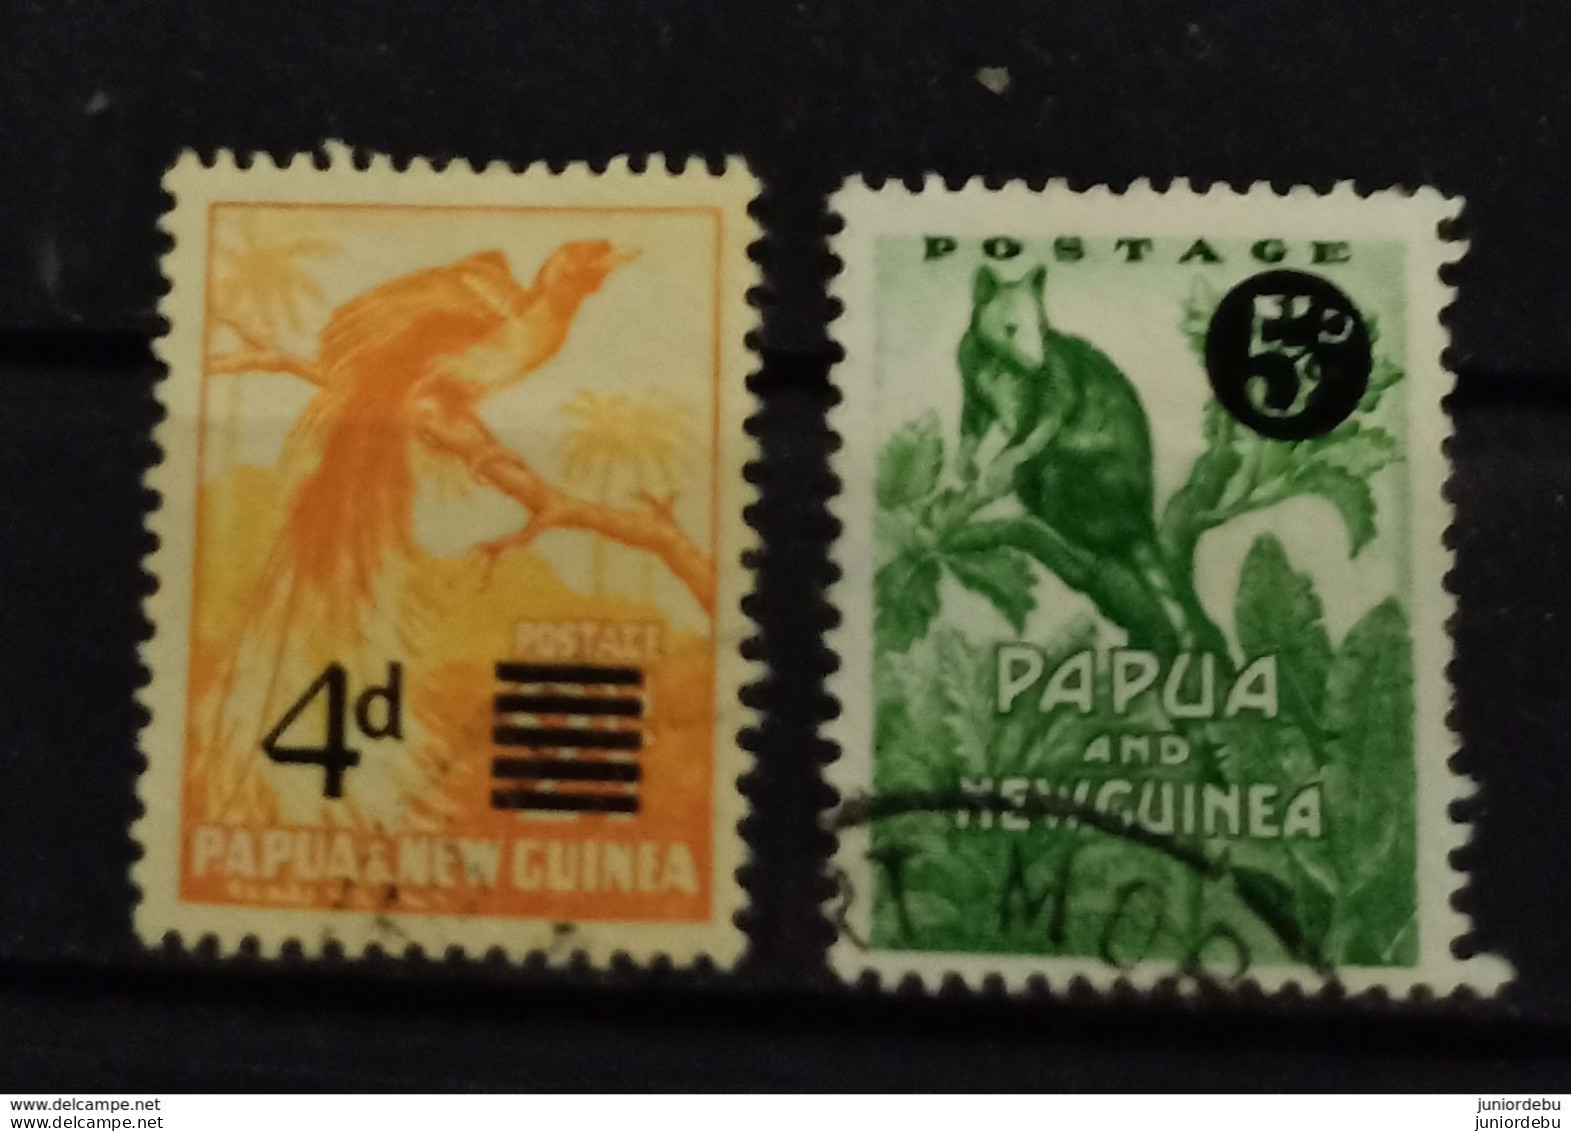 Papua New Guinea -  1967 - 1959 Surcharged On 1952 Local Motif Issues  - 2 Diff -  USED. ( D) - ( OL 03/04/2020) - Papúa Nueva Guinea